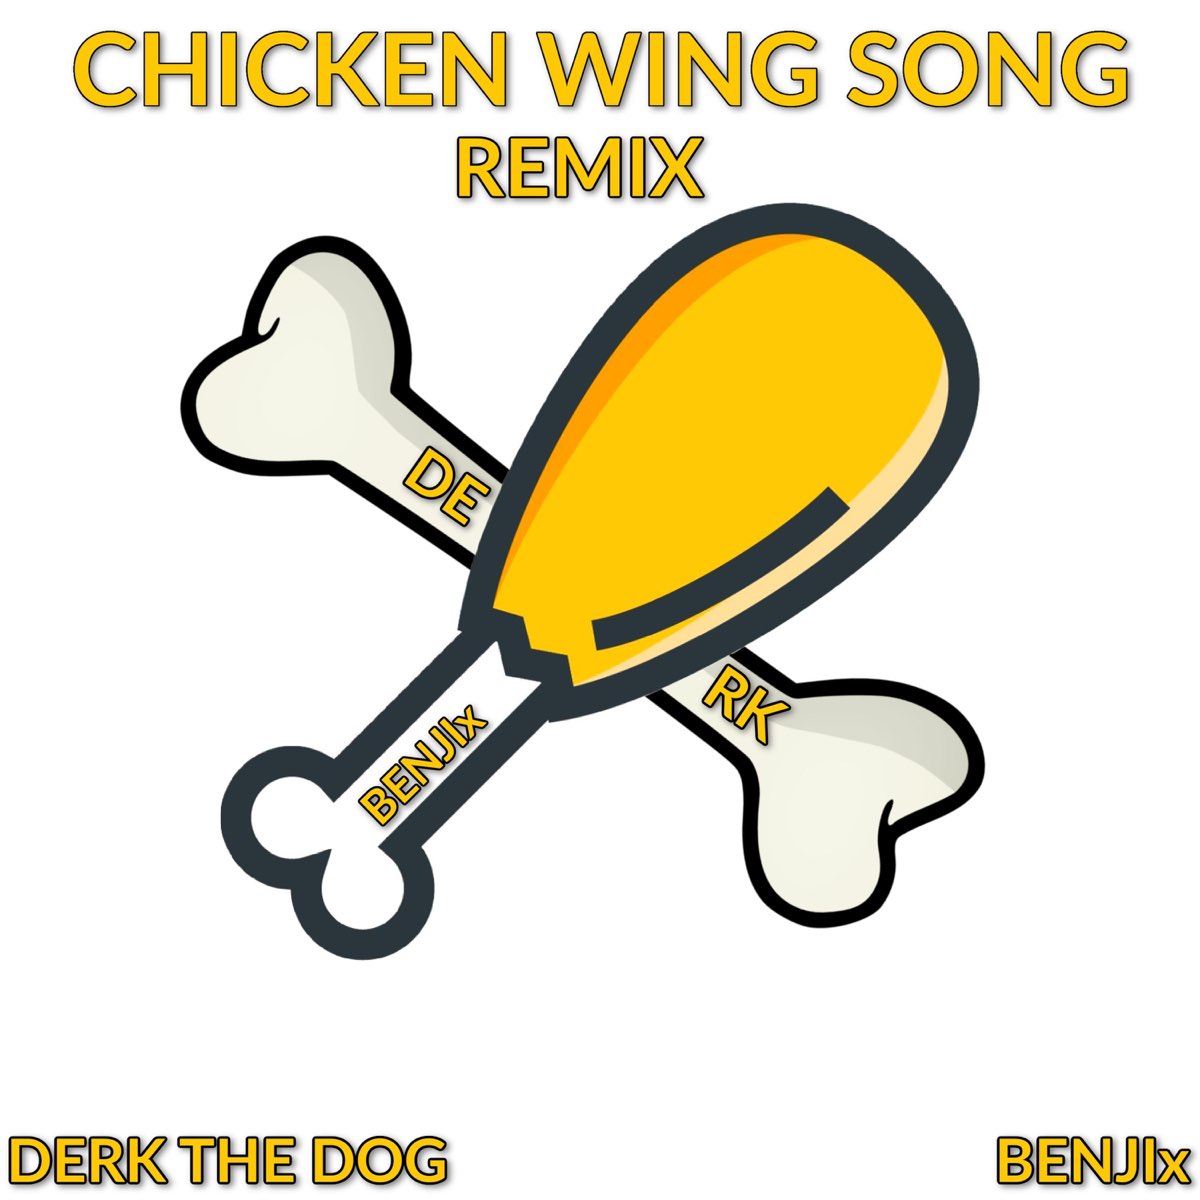 Chicken Wing Song (Remix) - Single by Derk the Dog on Apple Music